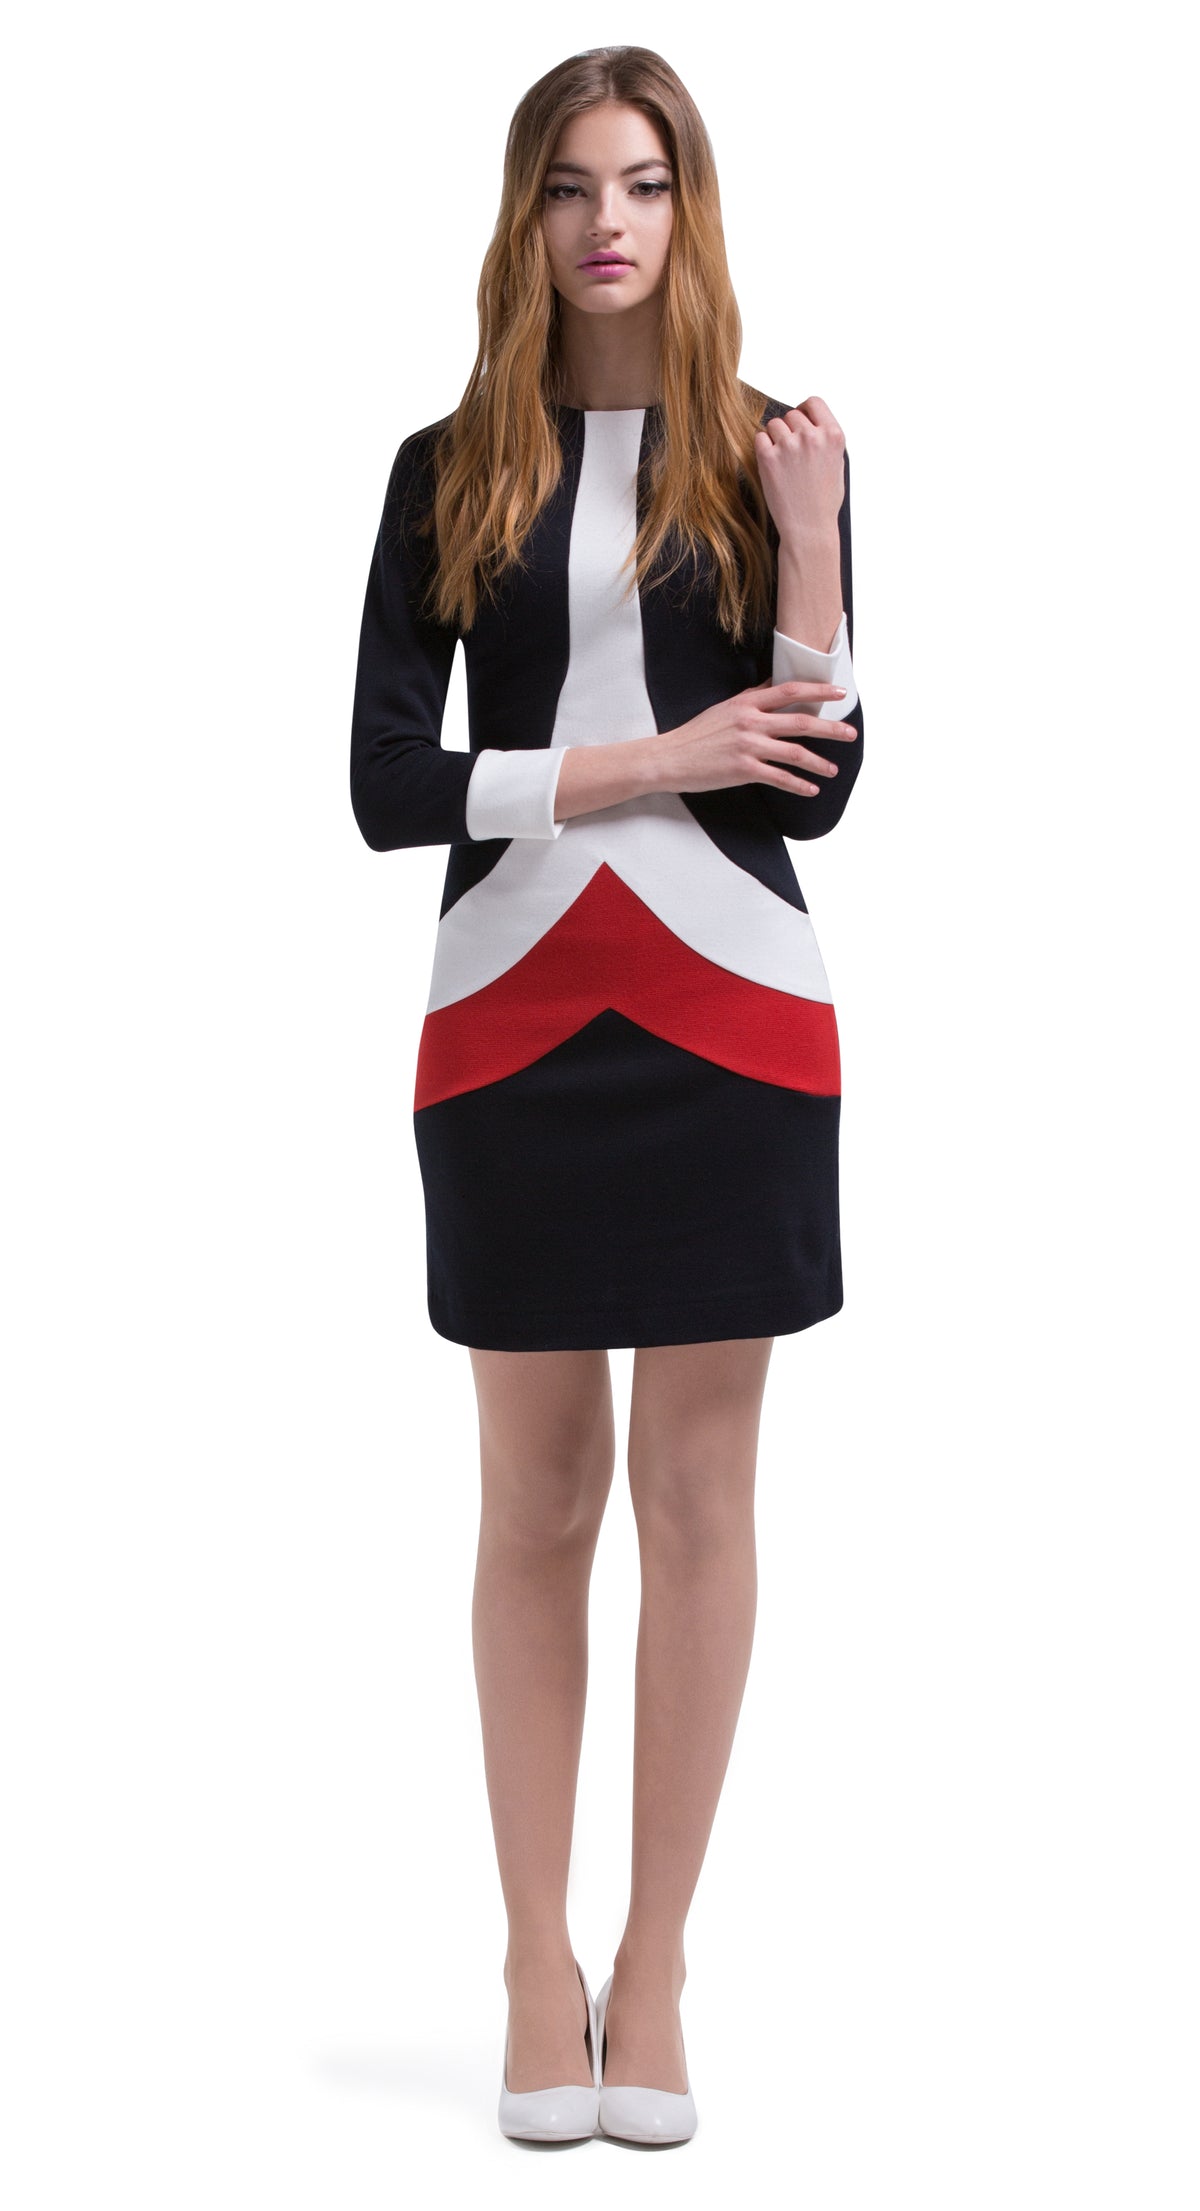 This Autumn, long sleeve Italian jersey straight cut dress delivers an immediate sixties retro impression through use of the chevron bodice panels creating a unique tric-olour stripe. Back zipper closure, full length sleeve with white cuff detailing. Generous stretch within the jersey; a comfortable dress without surrendering impacting style.